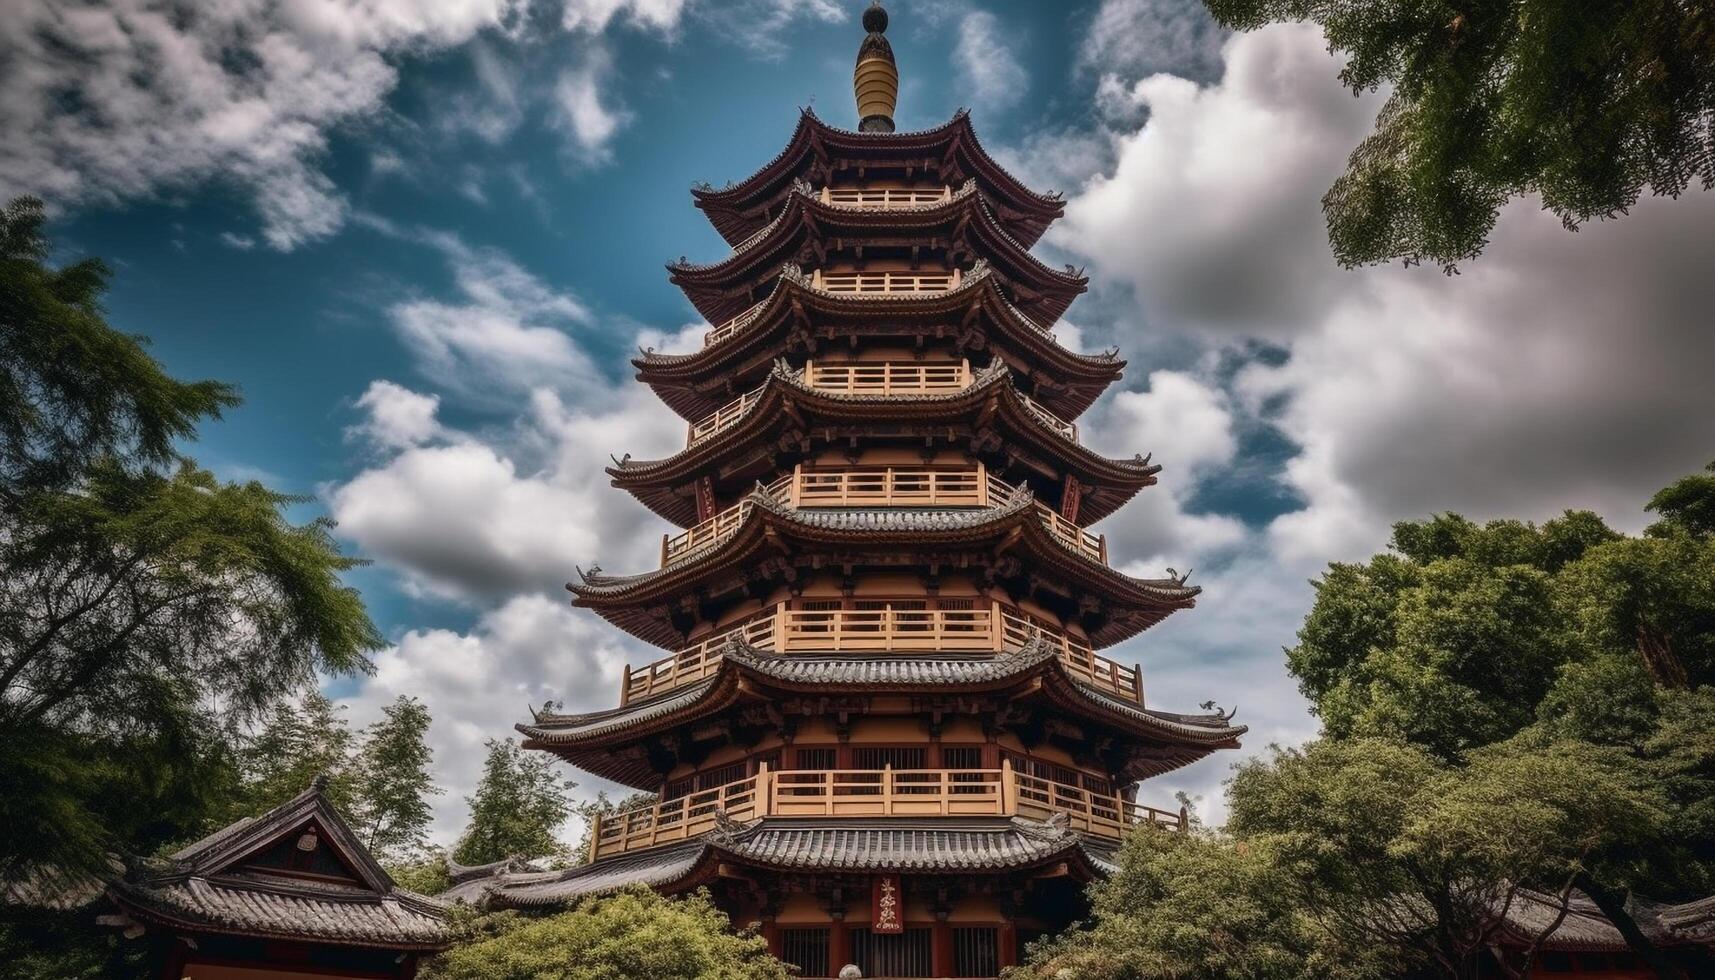 Ancient pagoda symbolizes spirituality in East Asian culture generated by AI photo